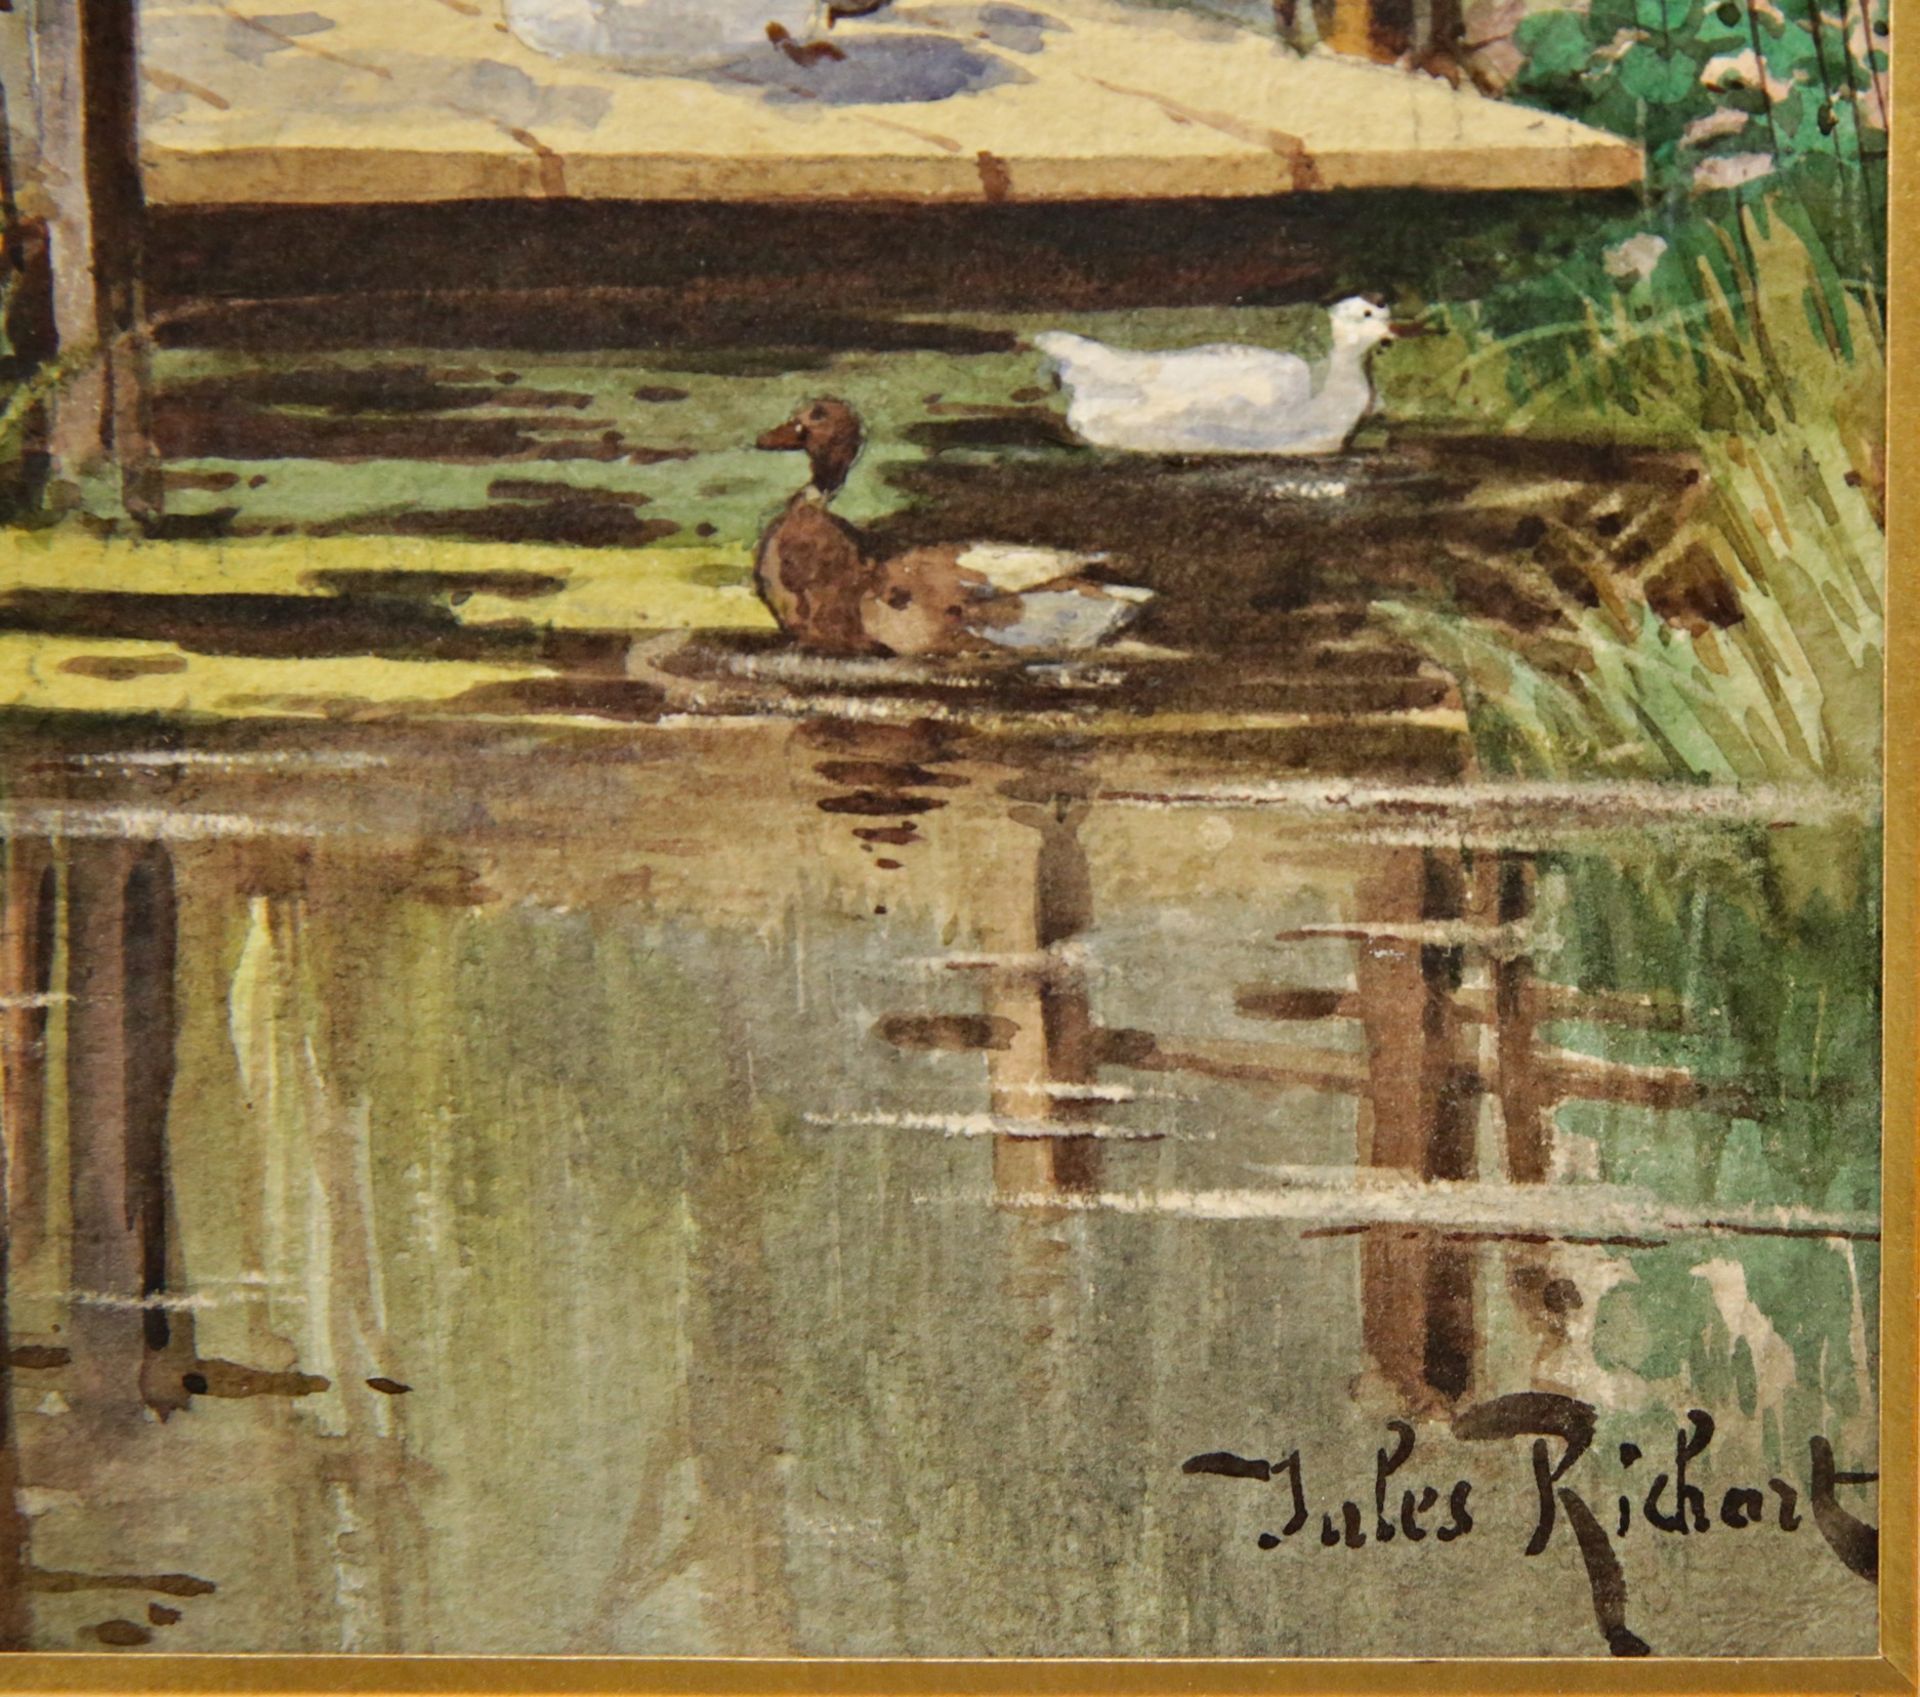 Jules RICHARD (XIX-XX) "A duck pontoon", watercolor on paper, French painting of the 19th-20th centu - Image 5 of 6